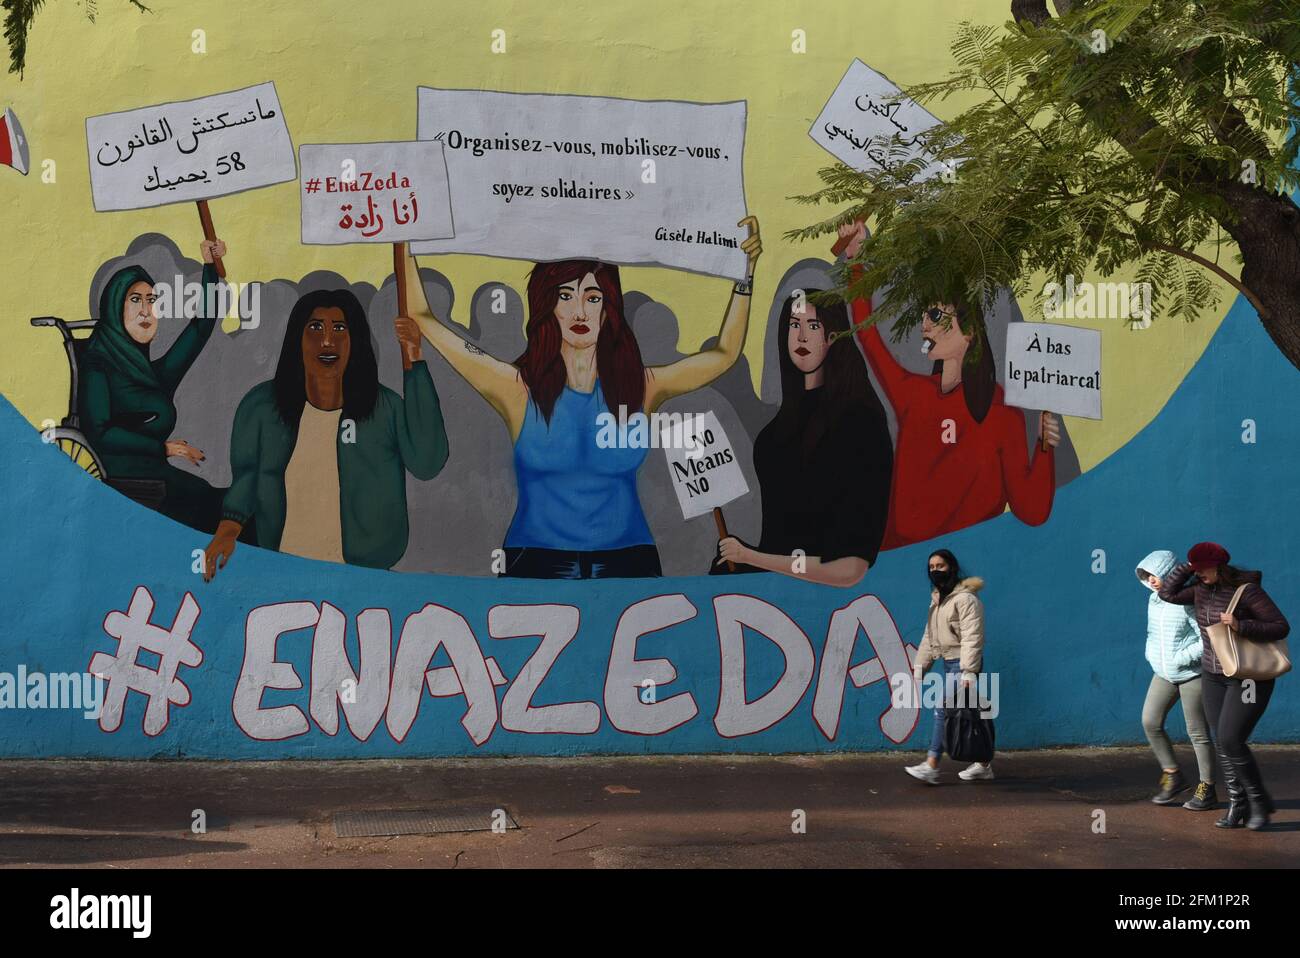 *** STRICTLY NO SALES TO FRENCH MEDIA OR PUBLISHERS - RIGHTS RESERVED ***January 12, 2021 - Tunis, Tunisia: A mural shows women protesting under the hashtag Ena Zeda, which means Me Too in Arabic, as well as slogans against sexual harassment. Freedom of expression is one of the main benefits as Tunisia prepares to mark the 10th anniversary of the 2011 revolution, which kicked off the Arab Spring. The mood acrossTunisia is gloomy as the transition to a democratic system didn't help lifting the country out of poverty. Stock Photo